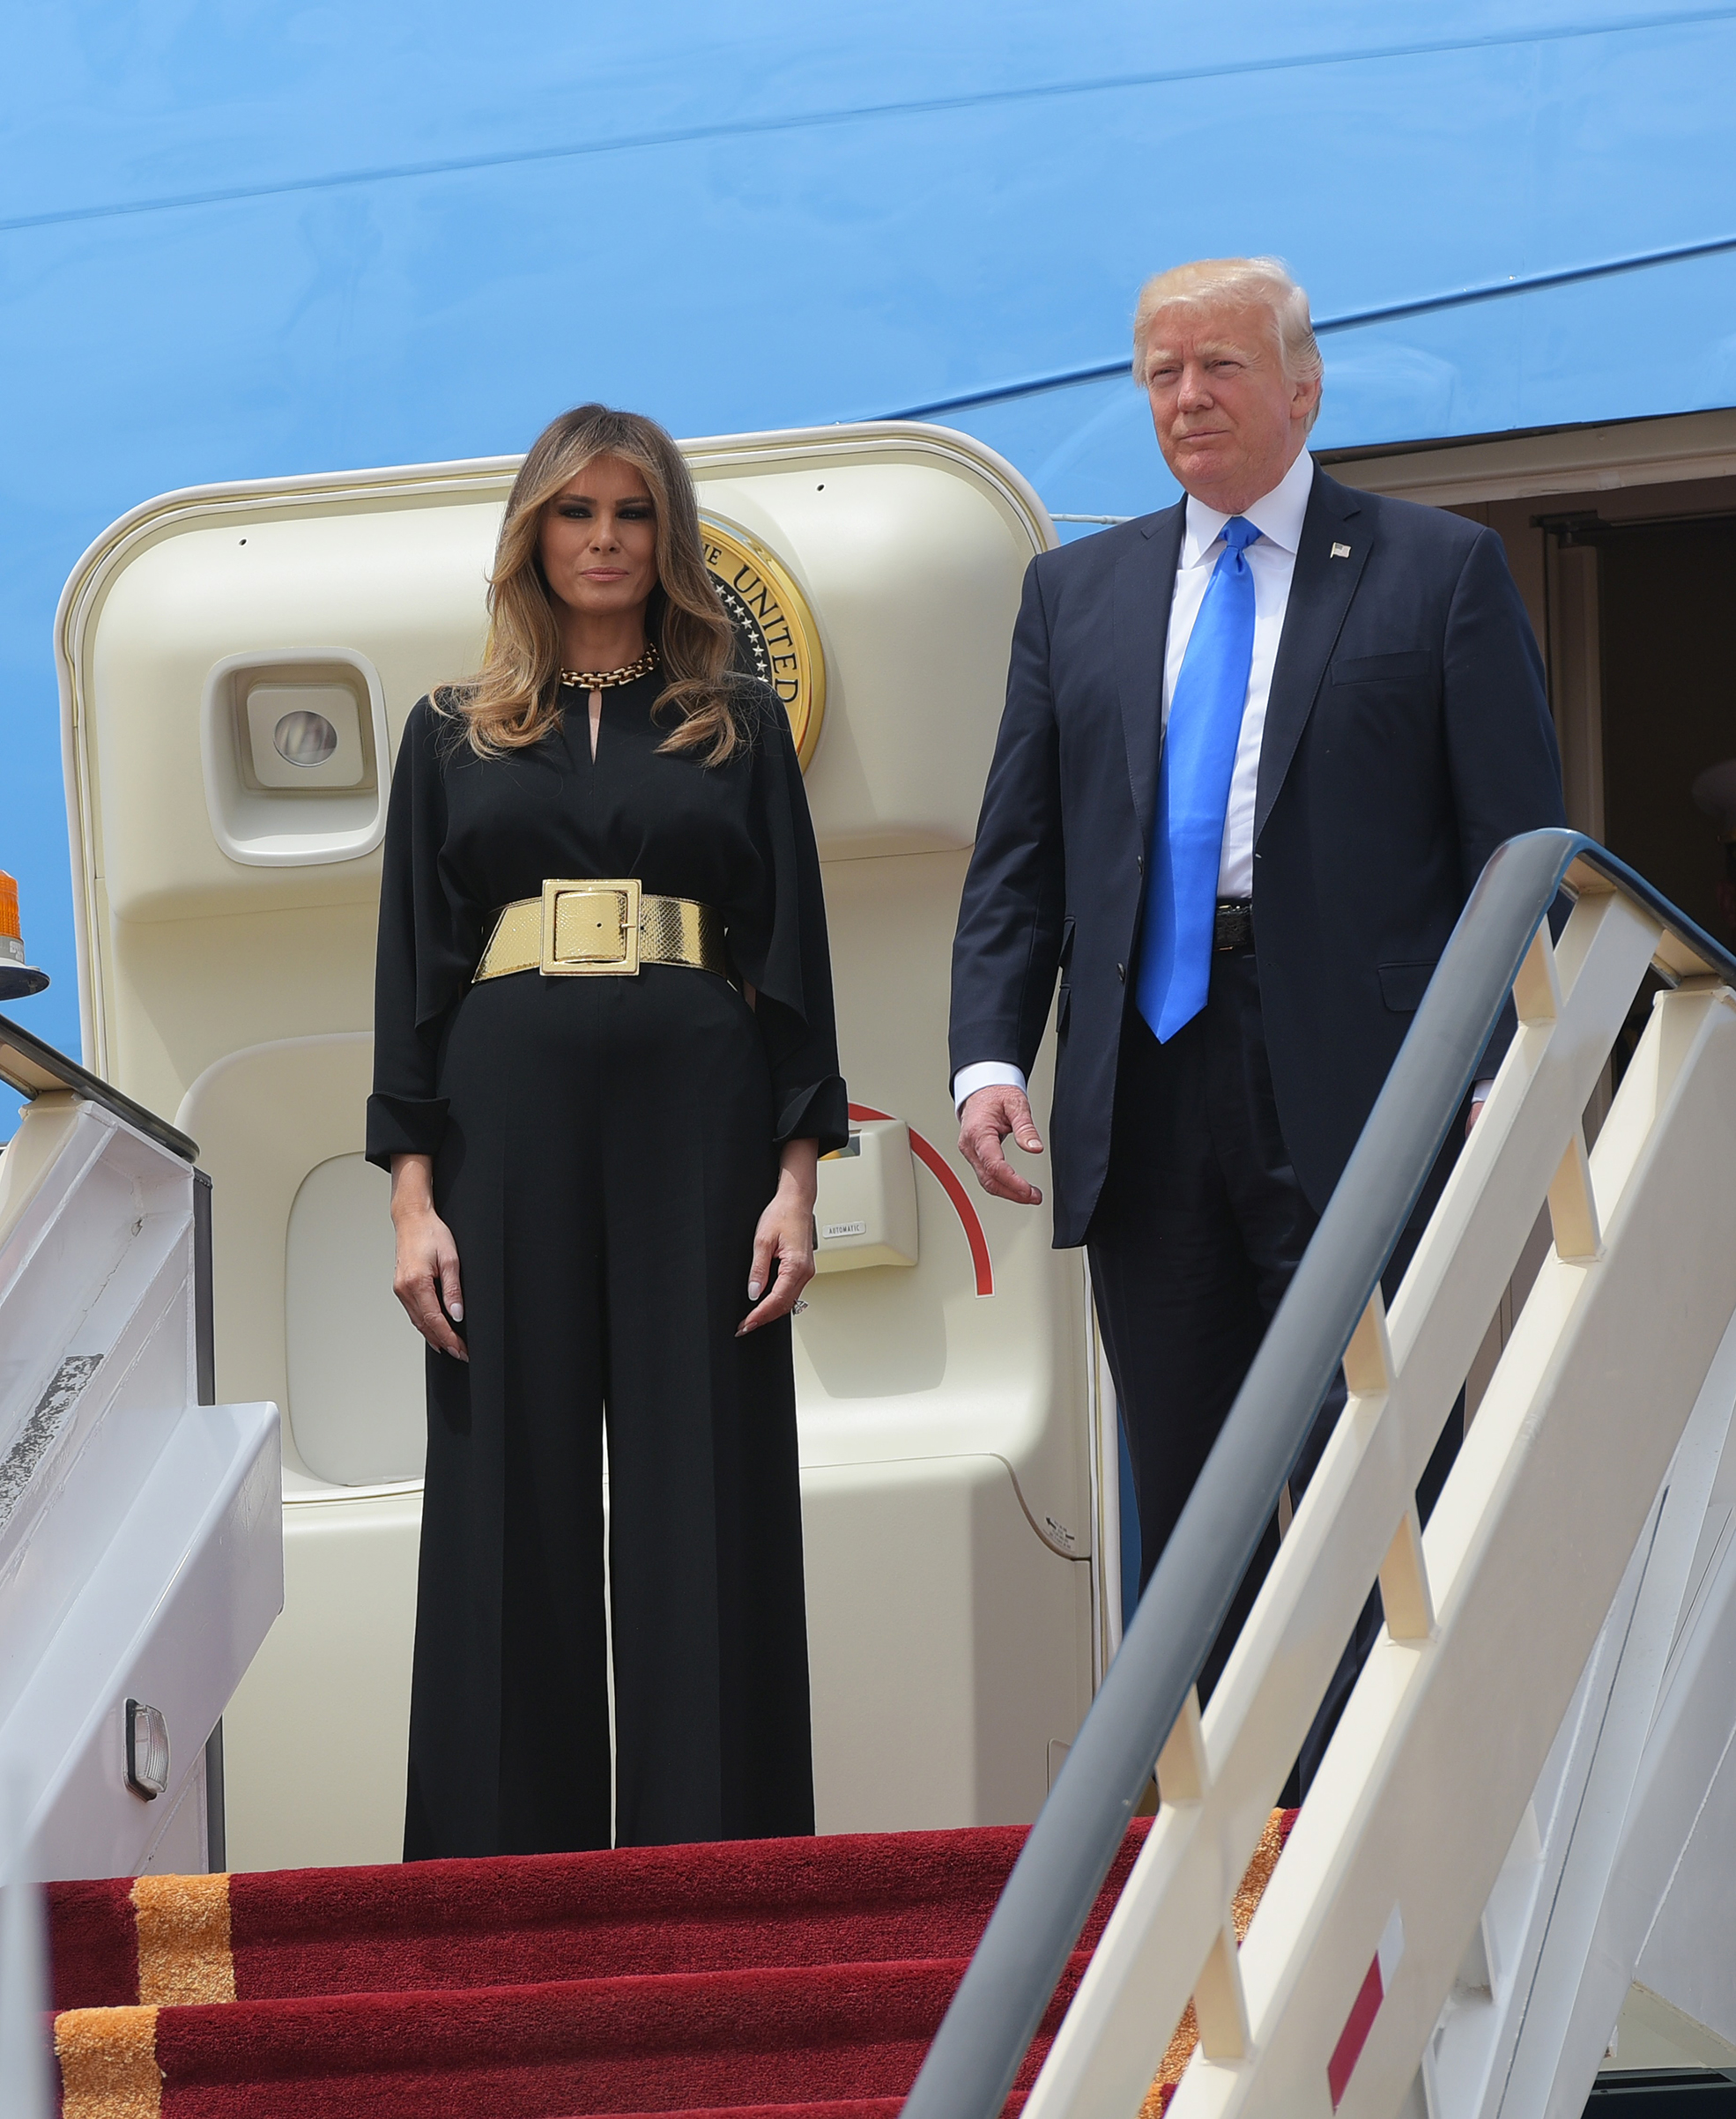 President Donald Trump and First Lady Melania Trump wearing black Stella McCartney jumpsuit and Saint Laurent belt, step off Air Force One upon arrival at King Khalid International Airport in Riyadh on May 20, 2017.